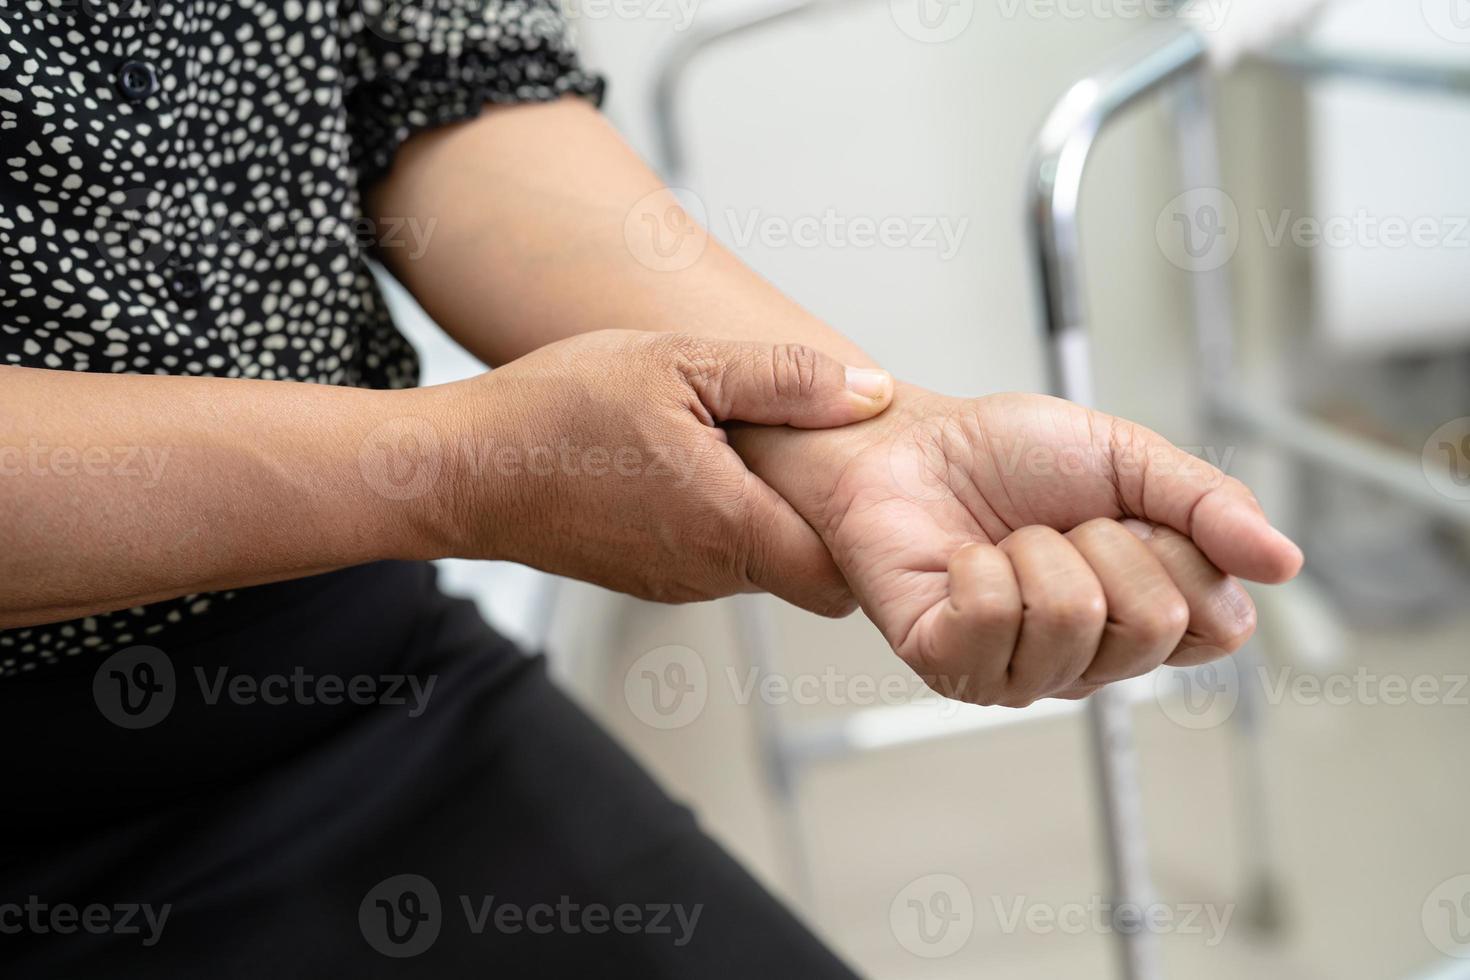 Asian lady woman patient touch and feel pain her elbow and arm, healthy medical concept. photo